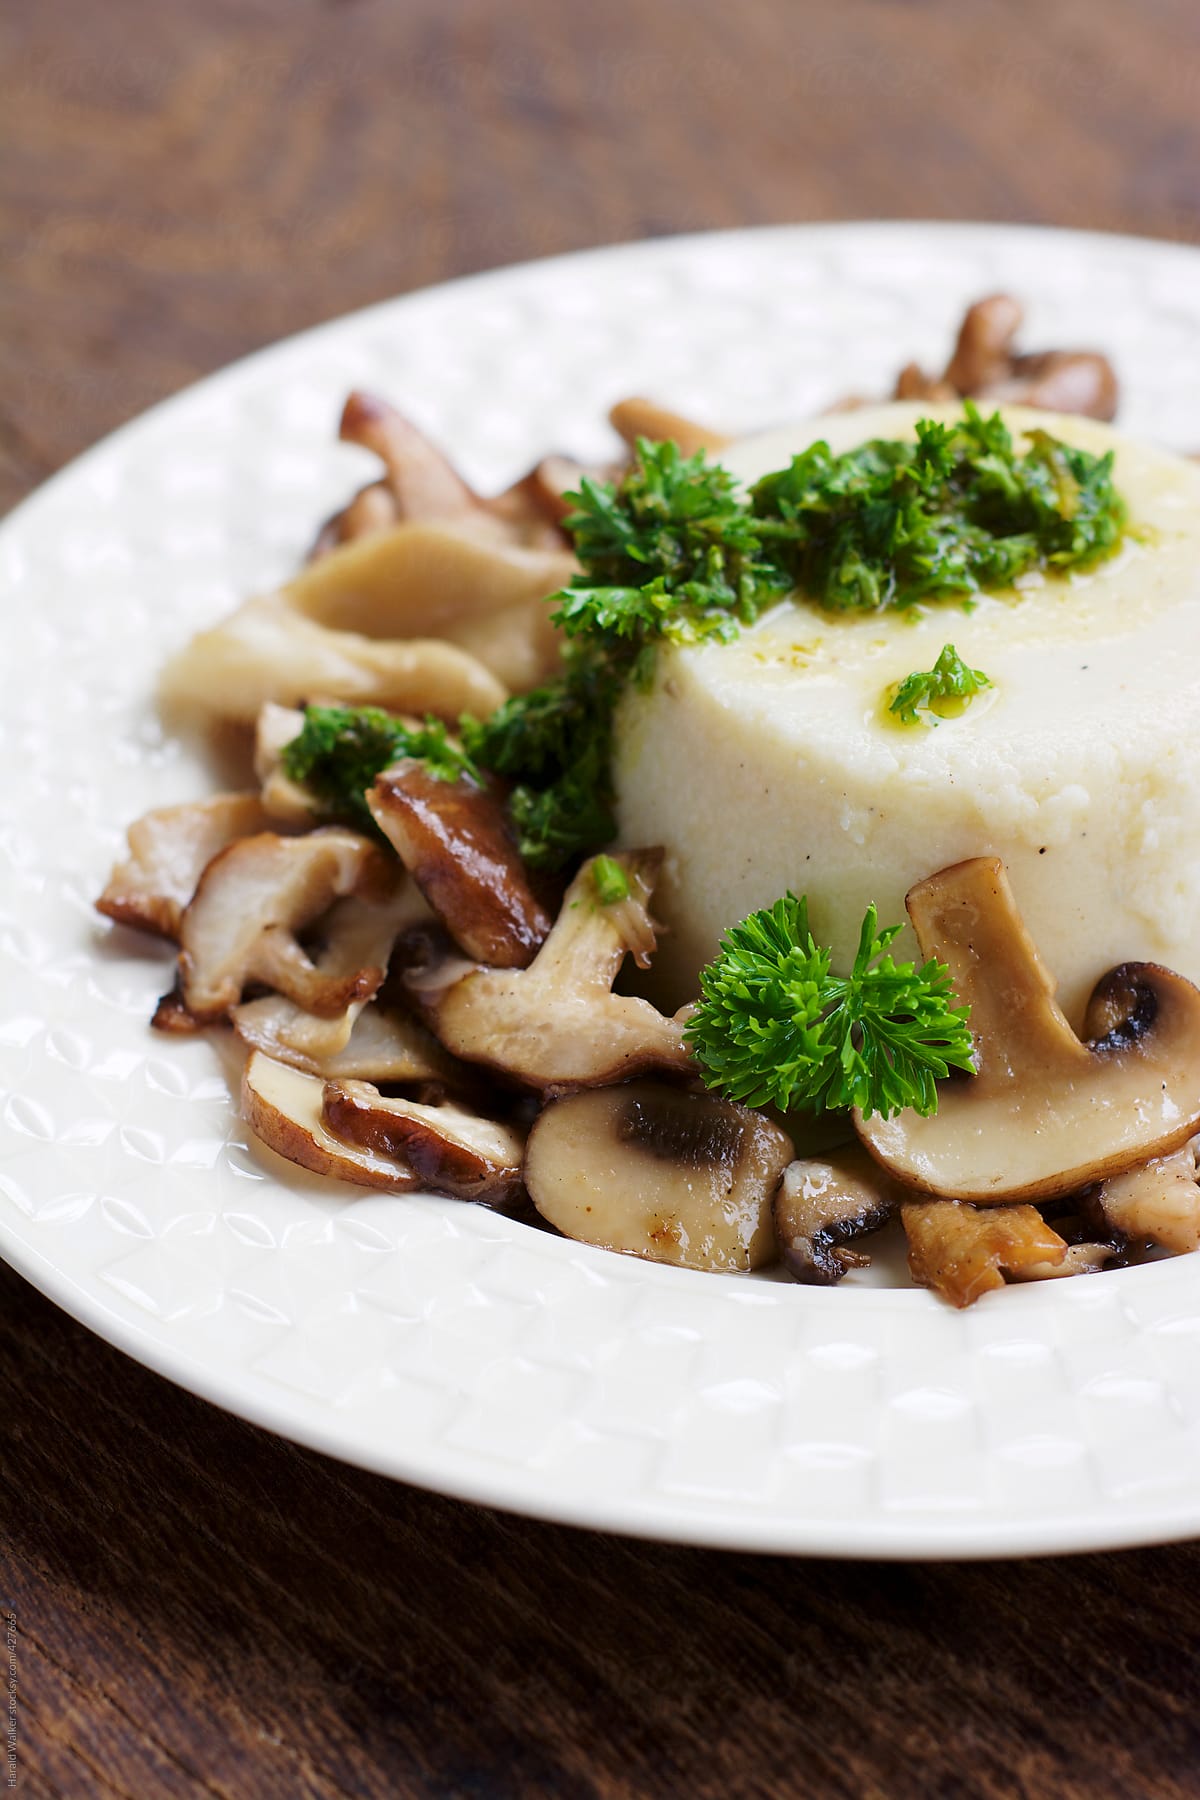 Celery Root Panna Cotta, with Wild Mushrooms and Parsley Sauce